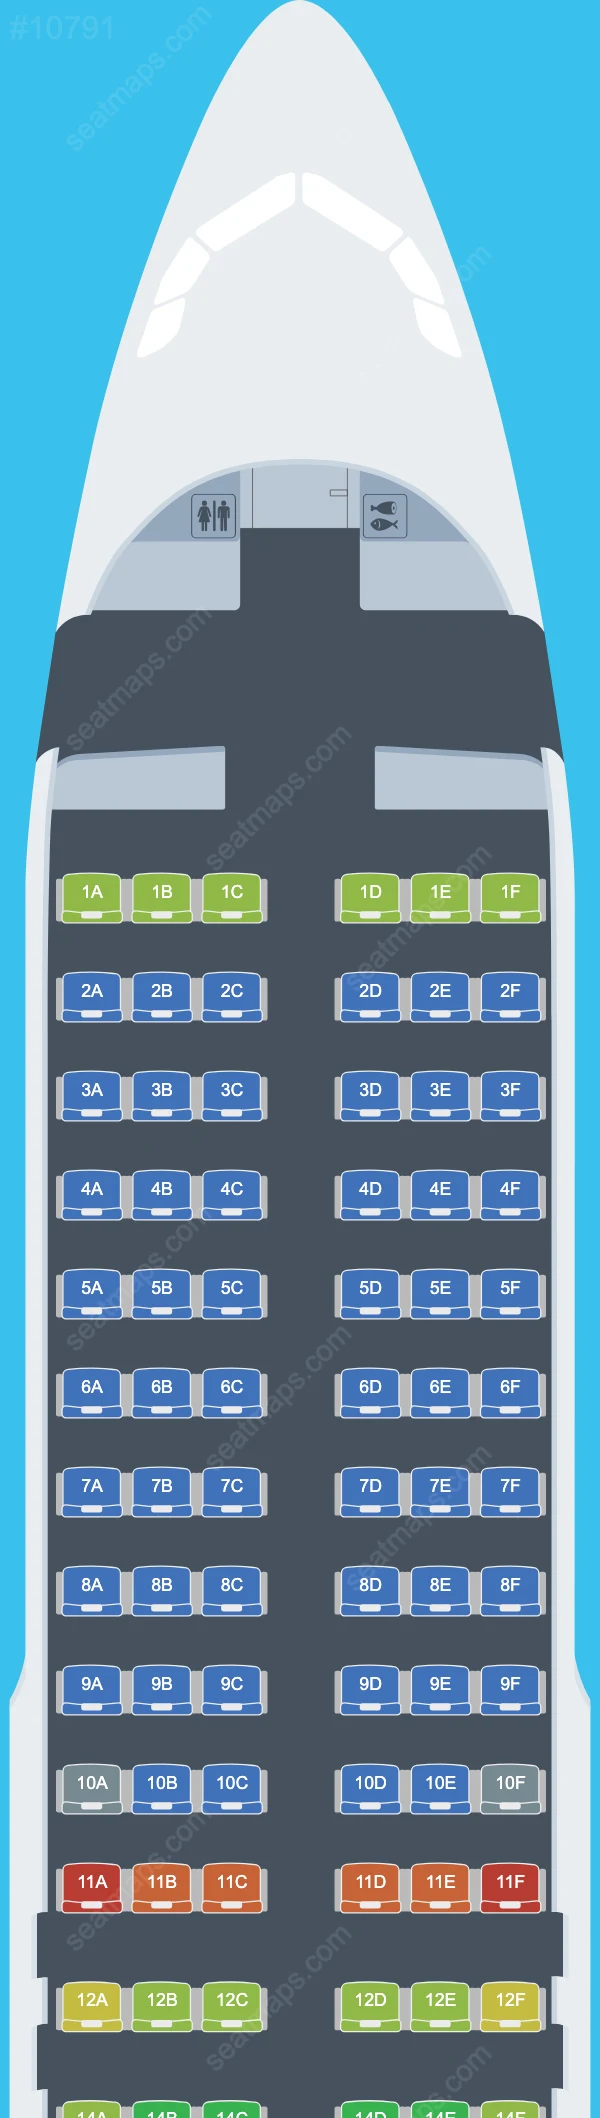 Chair Airlines Airbus A320 Seat Maps A320-200